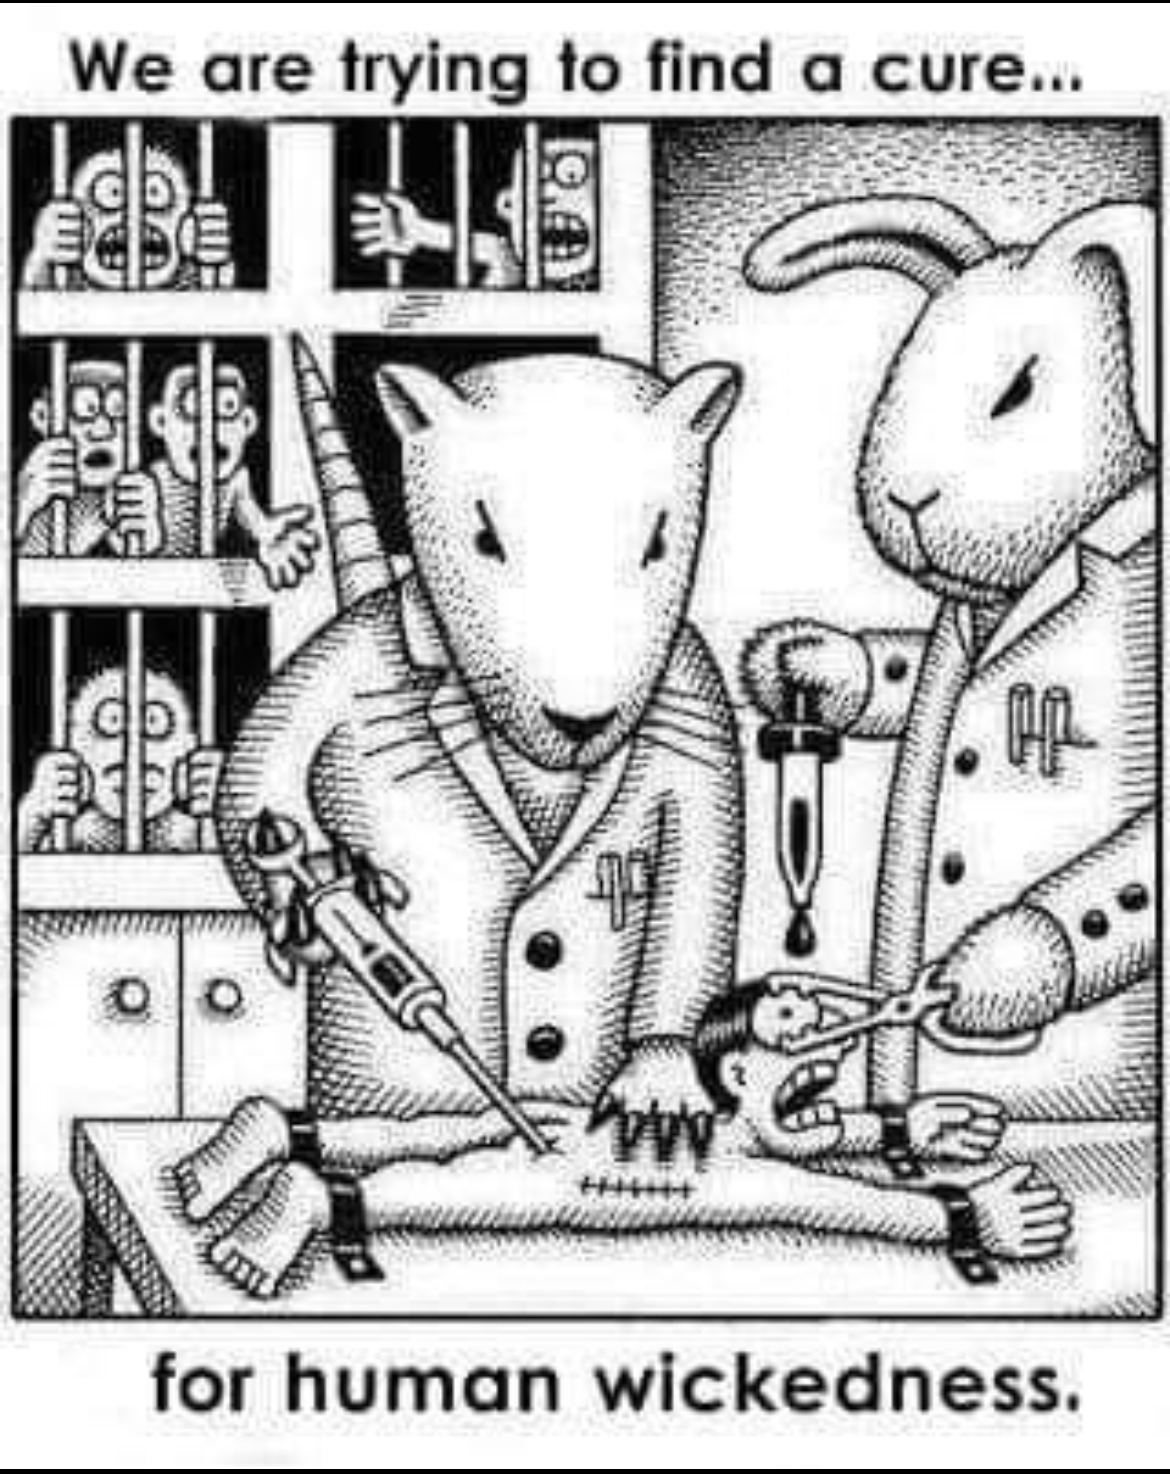 Drawing of a rat and a rabbit in lab coats, standing in the lab, experimenting on small and naked humans.  Caption: "we are trying to find a cure... for human wickedness."